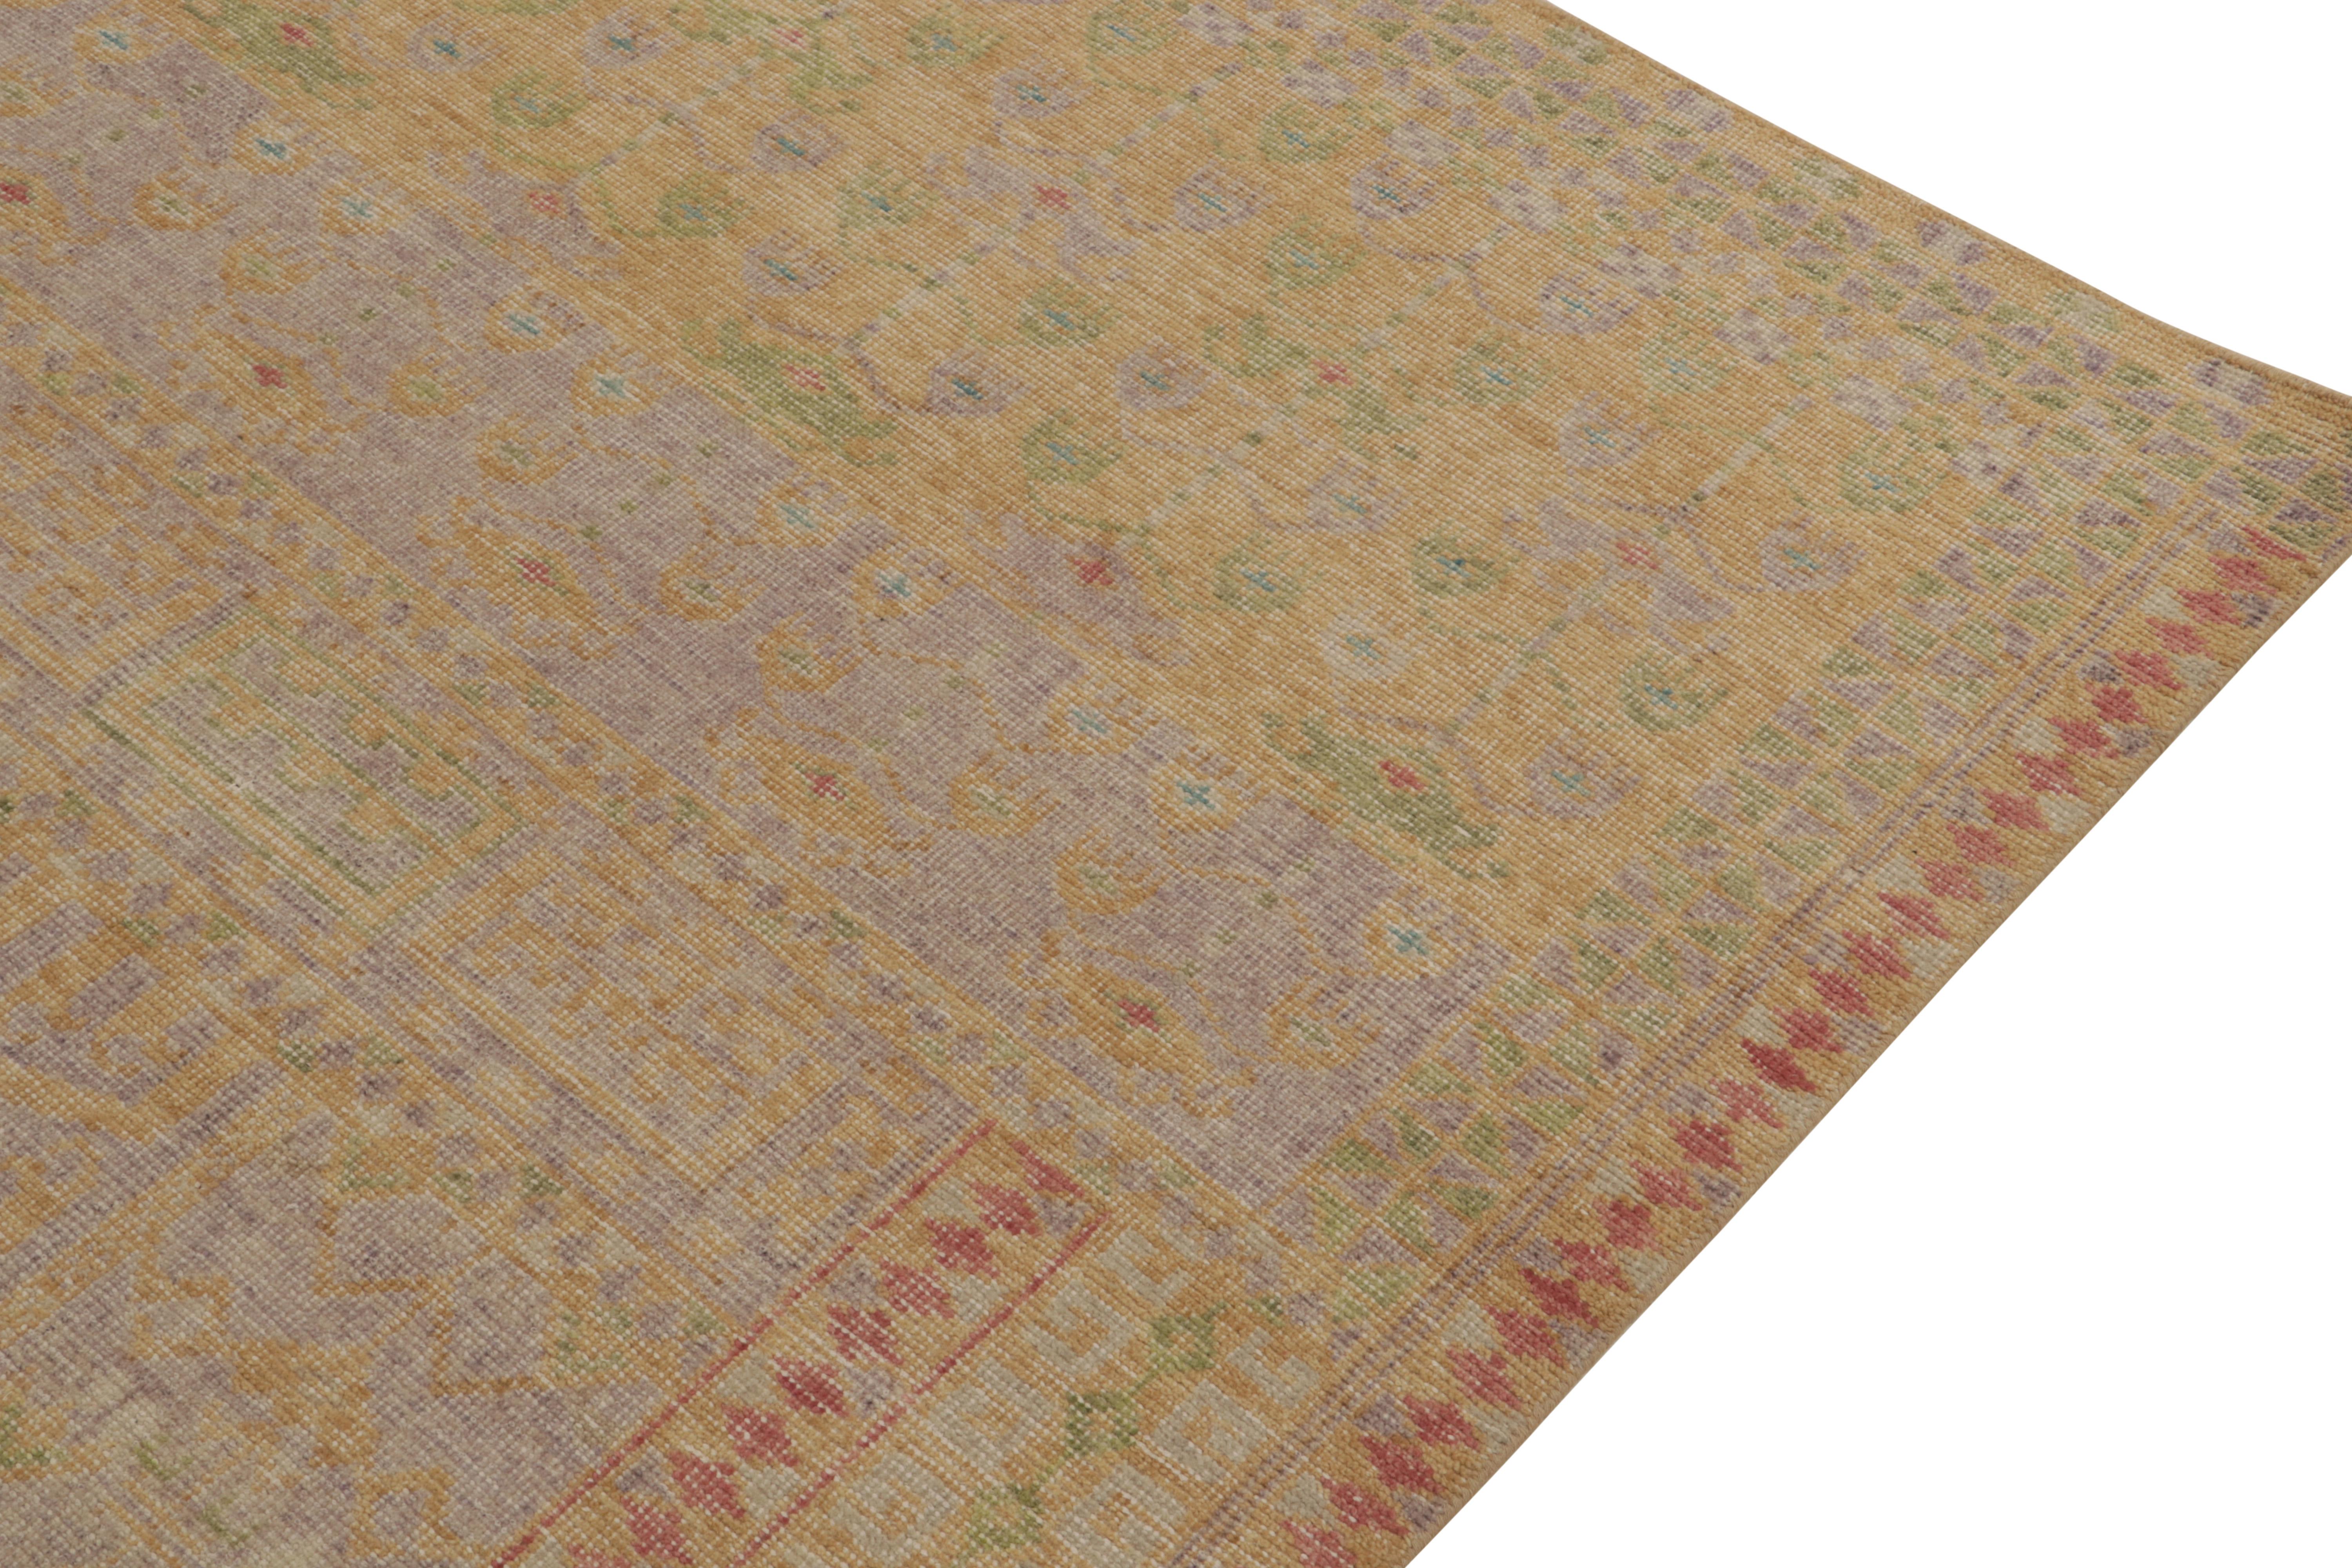 Hand-Knotted Rug & Kilim’s Distressed Style Rug in Beige-Brown, Green, Lavender Patterns For Sale